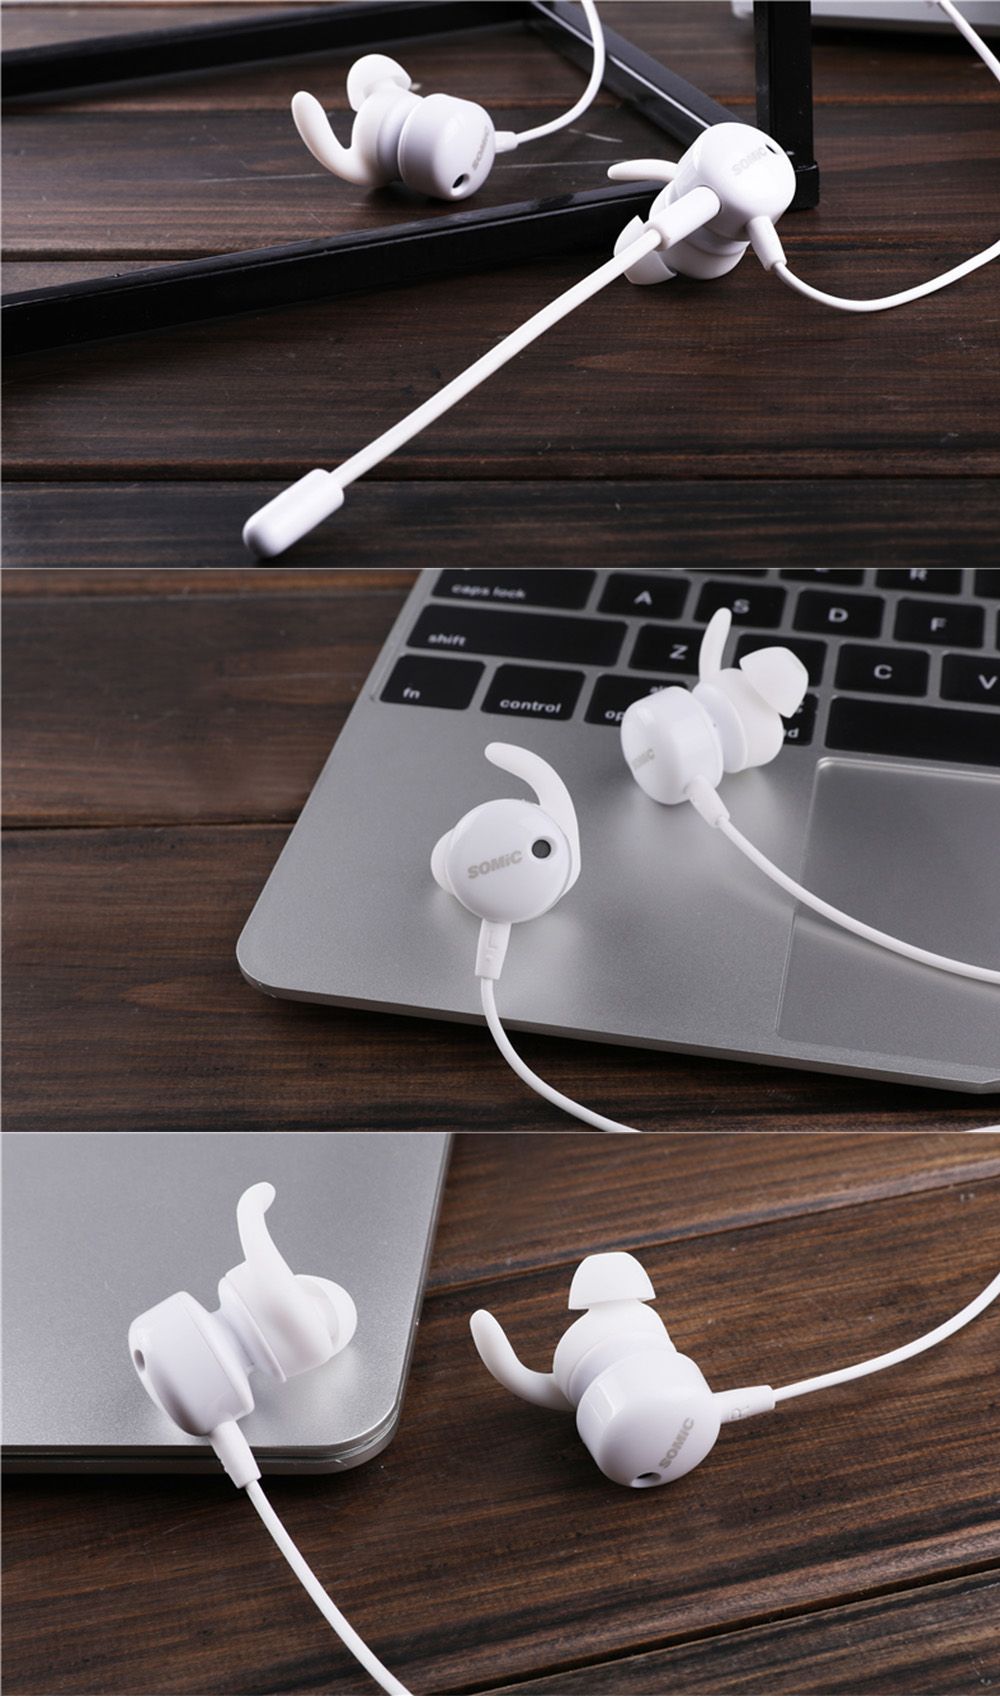 SOMiC-G628-Portable-35mm--USB-Wired-In-ear-Earphone-Gaming-White-Earphone-with-Dual-Microphones-for--1561686